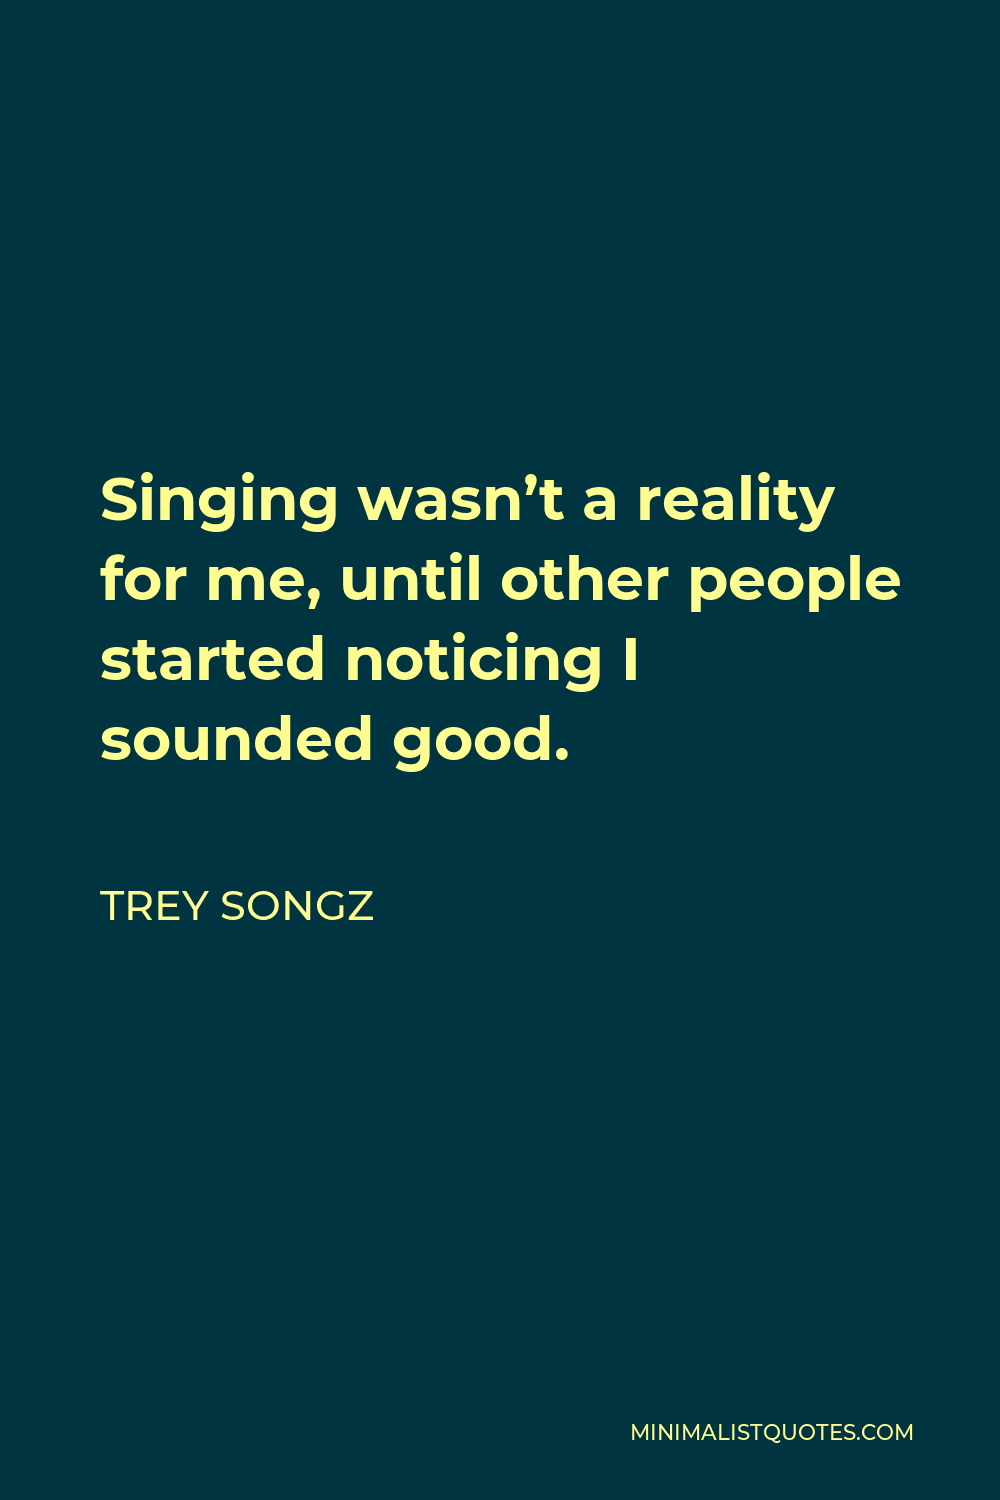 Trey Songz Quote - Singing wasn’t a reality for me, until other people started noticing I sounded good.